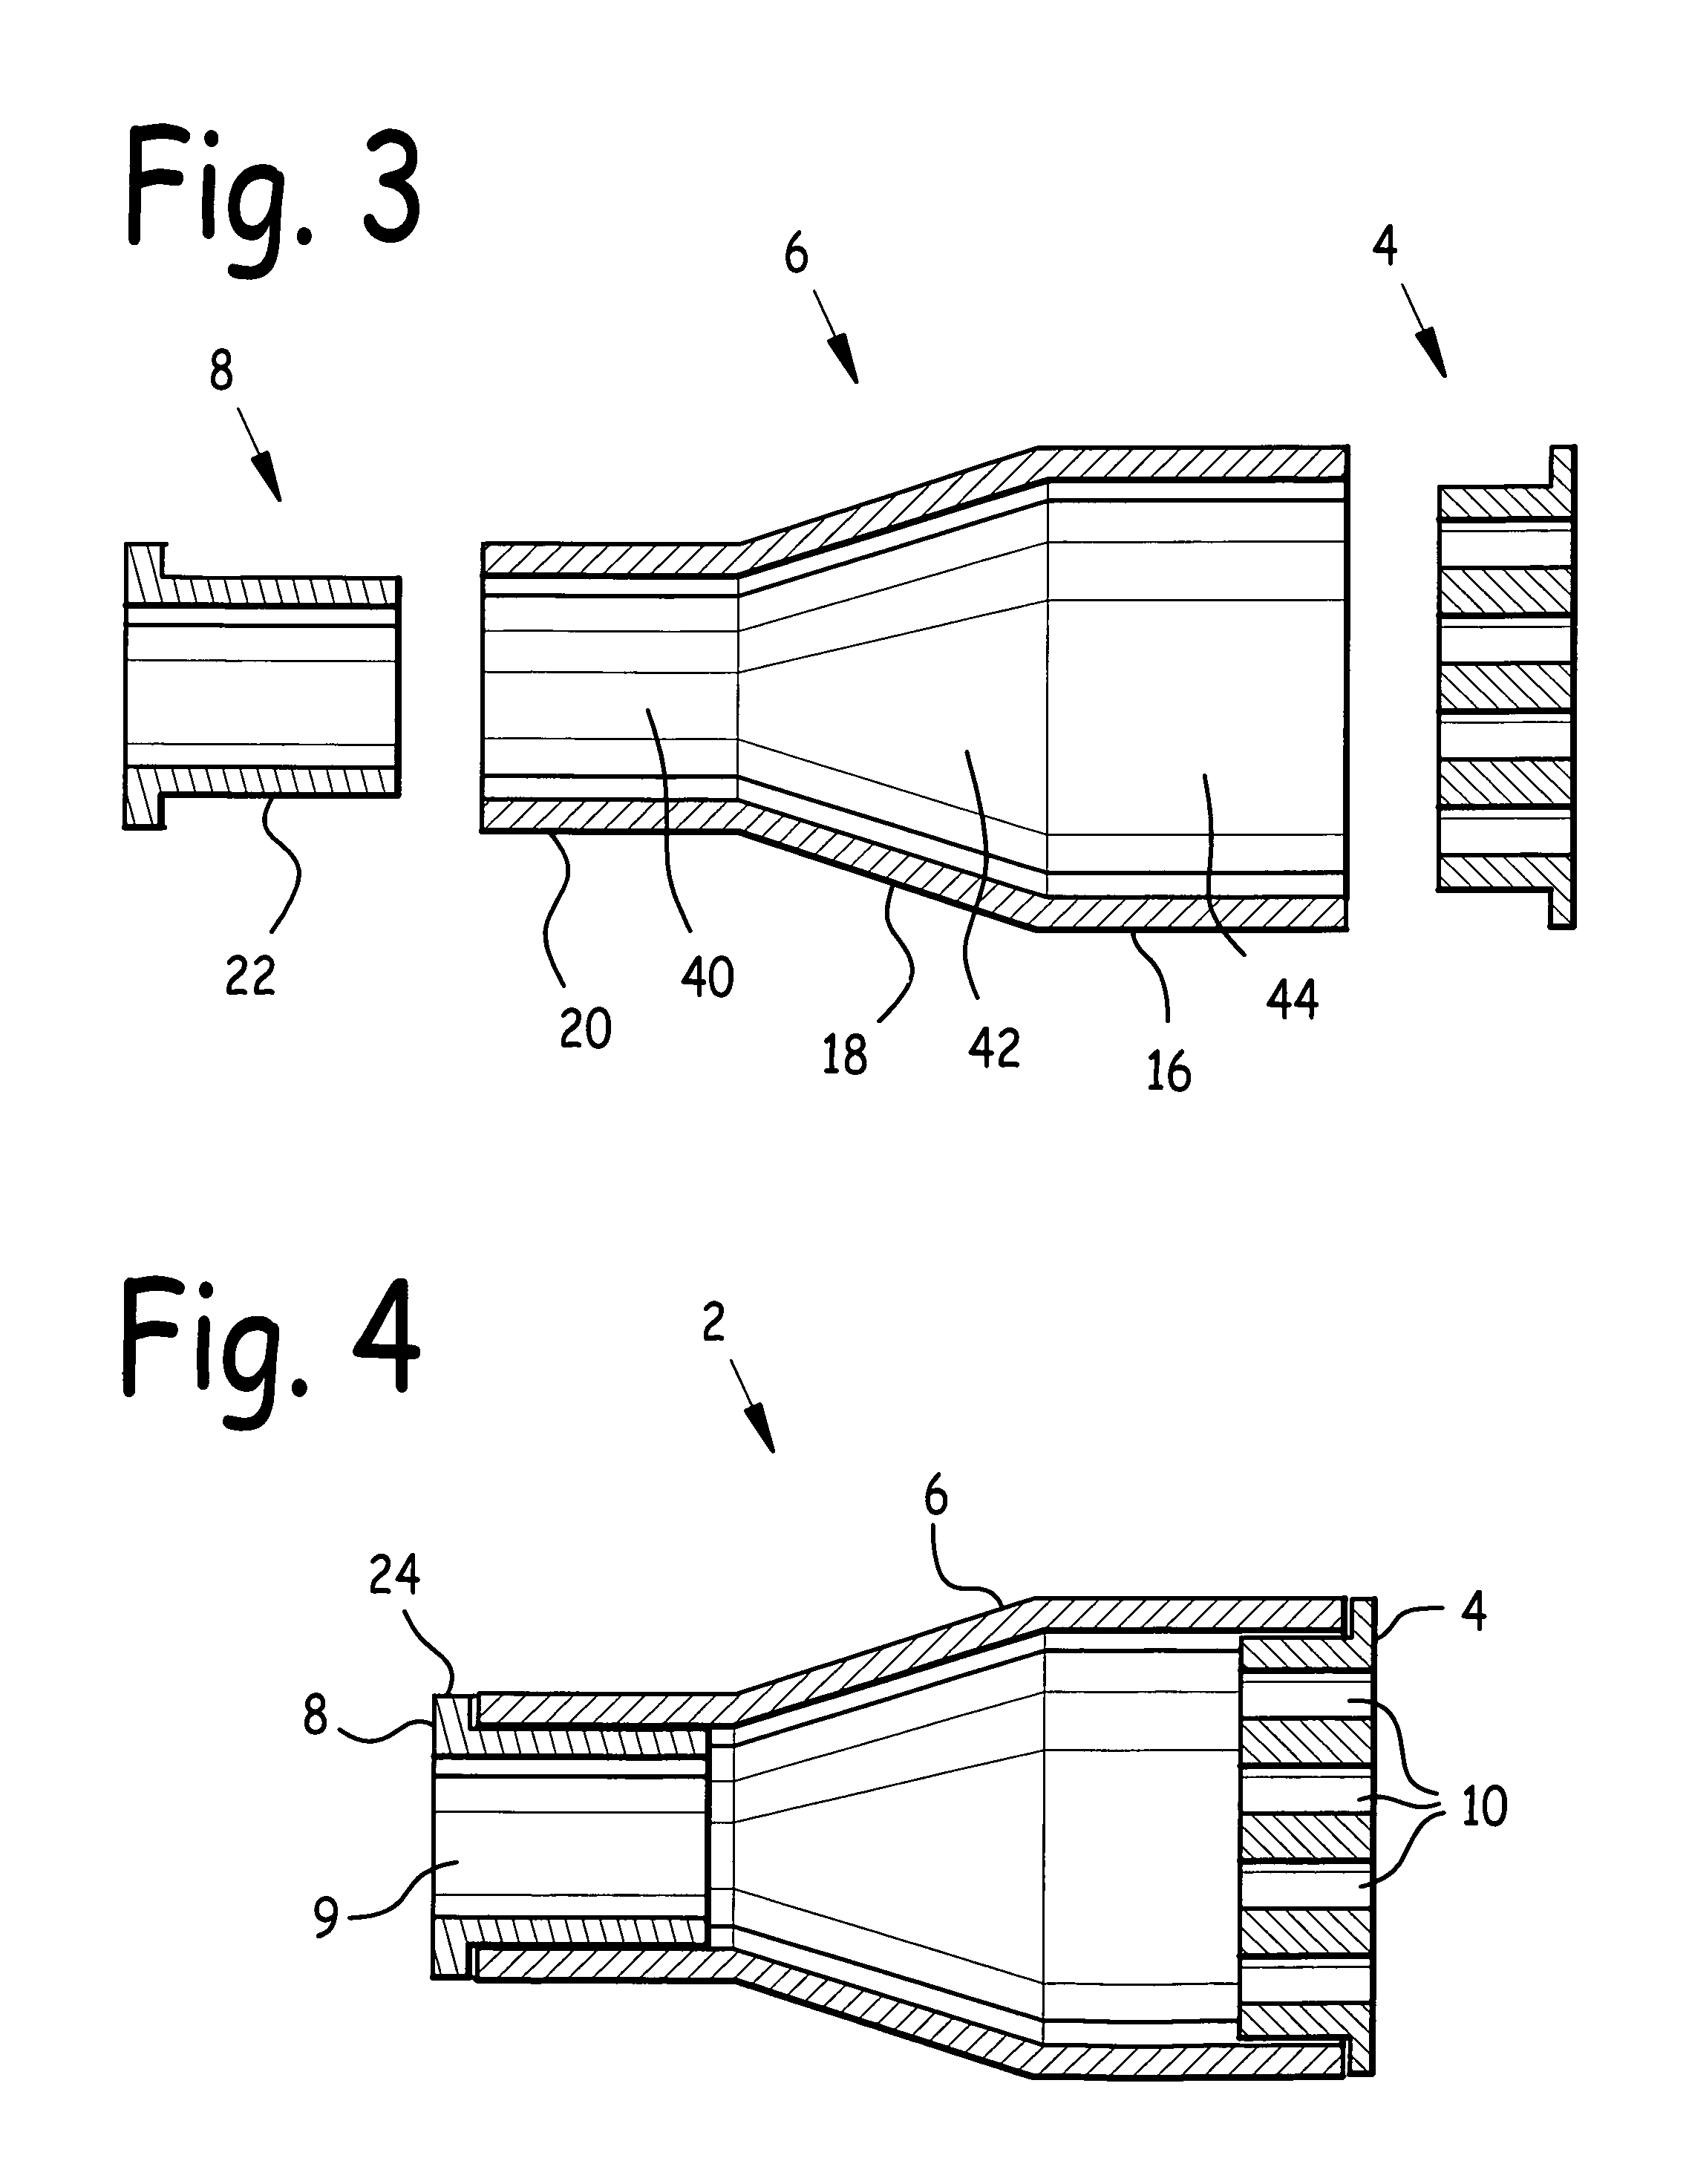 Apparatus and method to protect fiber ribbons